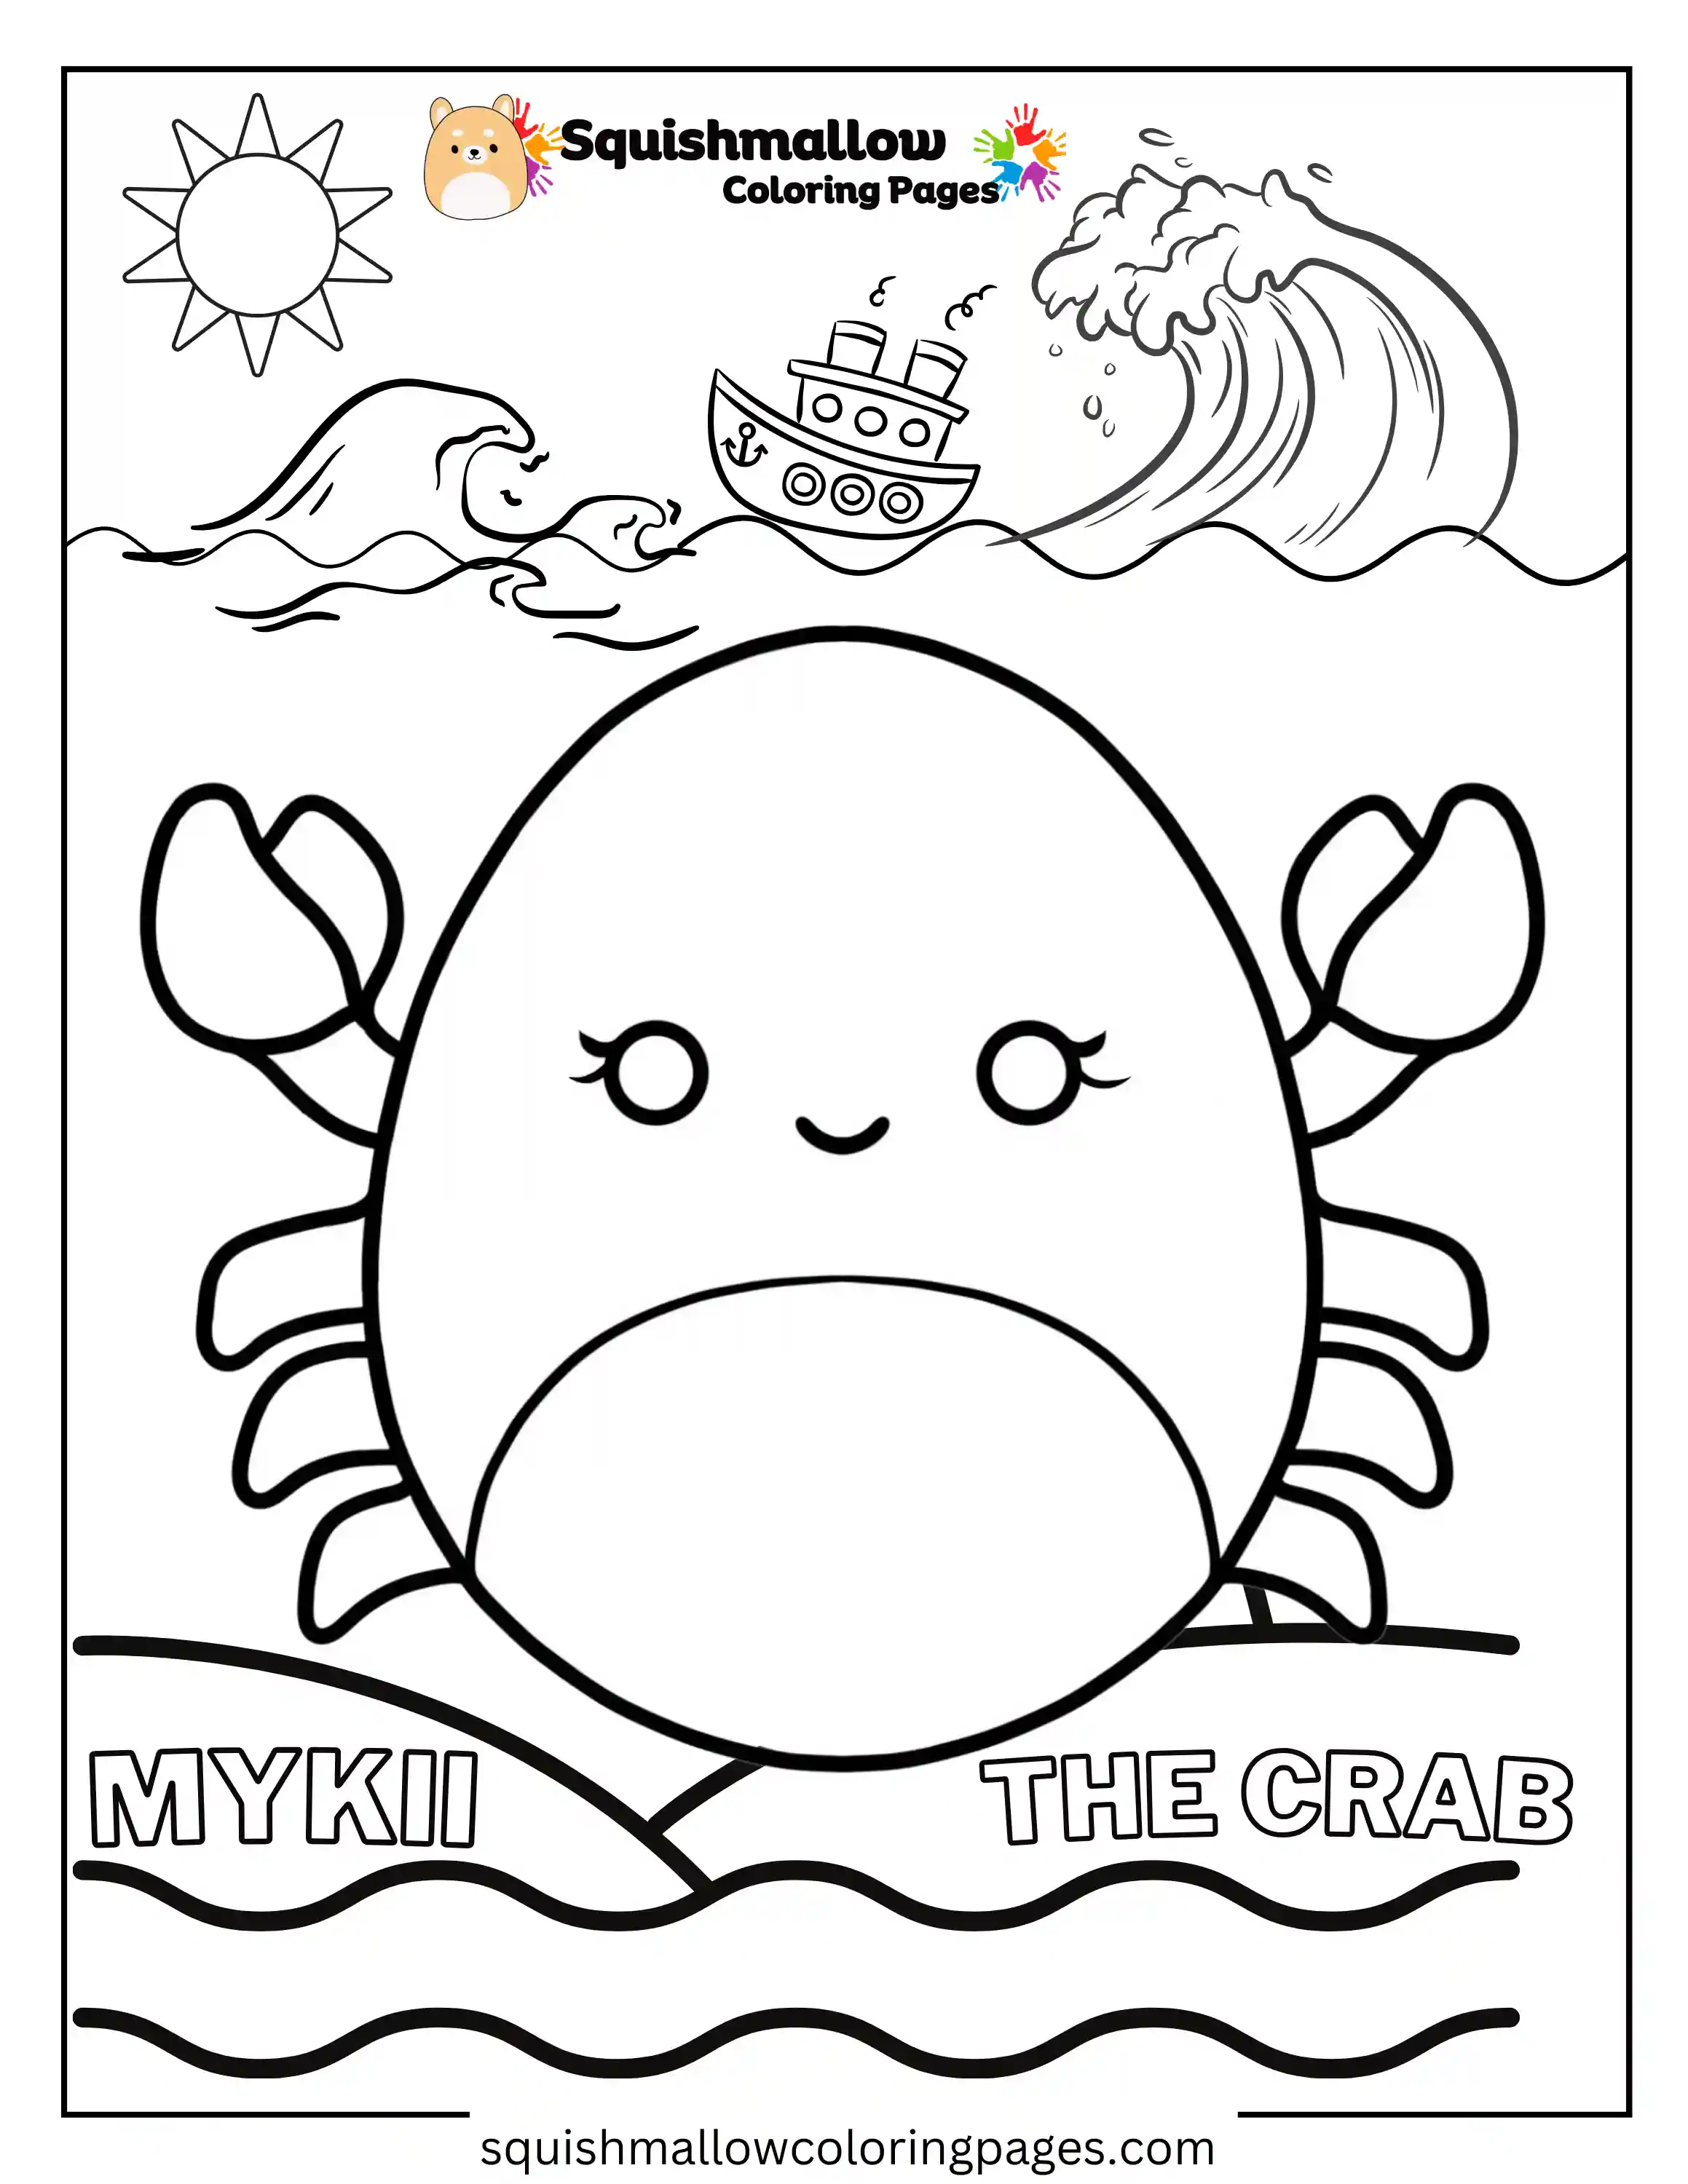 Mykii The Crab Squishmallow Coloring Pages